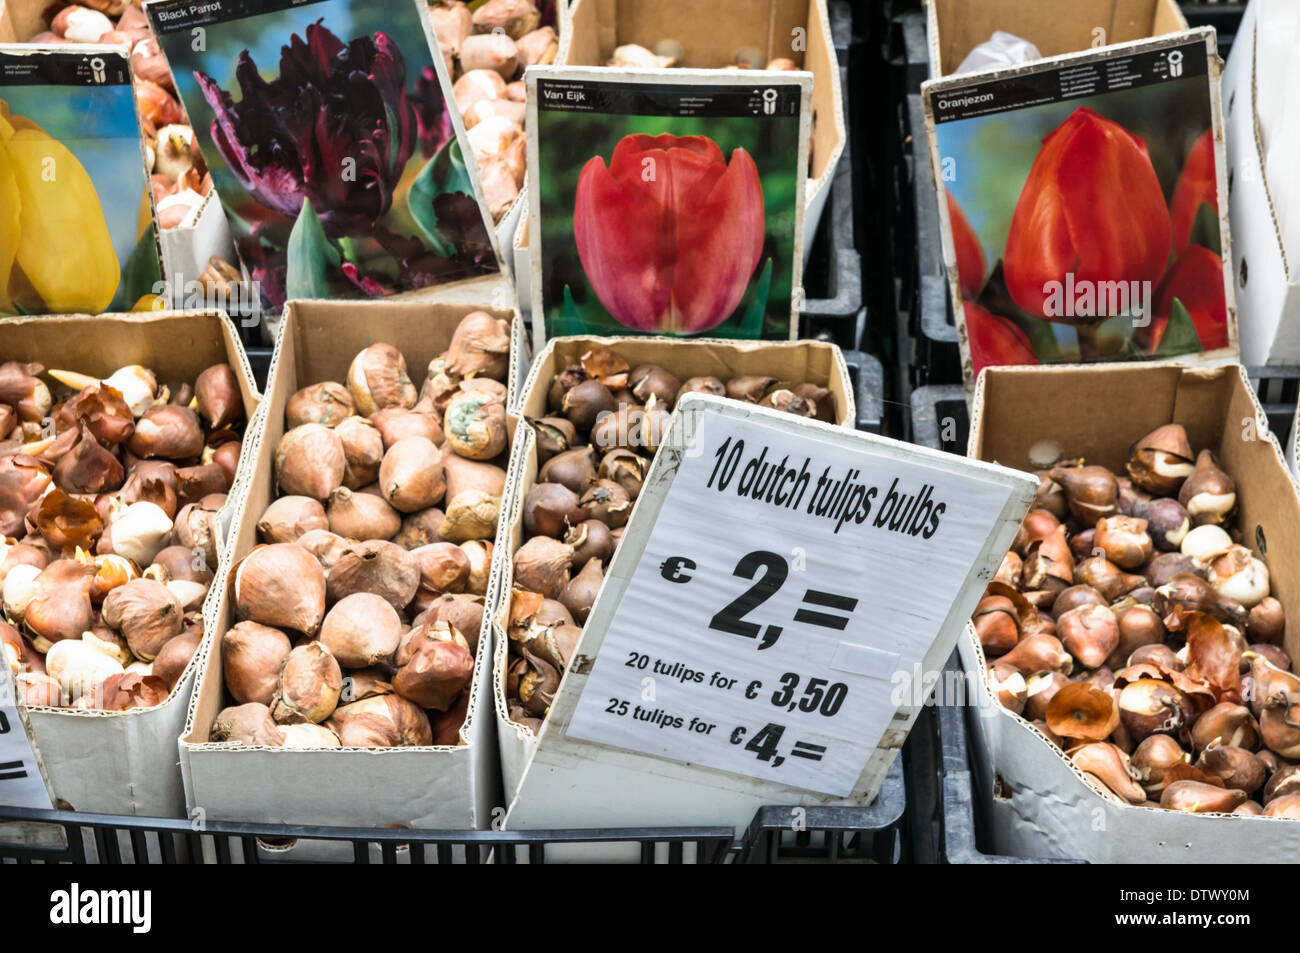 Tulips bulbs for sale at Amsterdam flower market, Amsterdam Netherlands Stock Photo